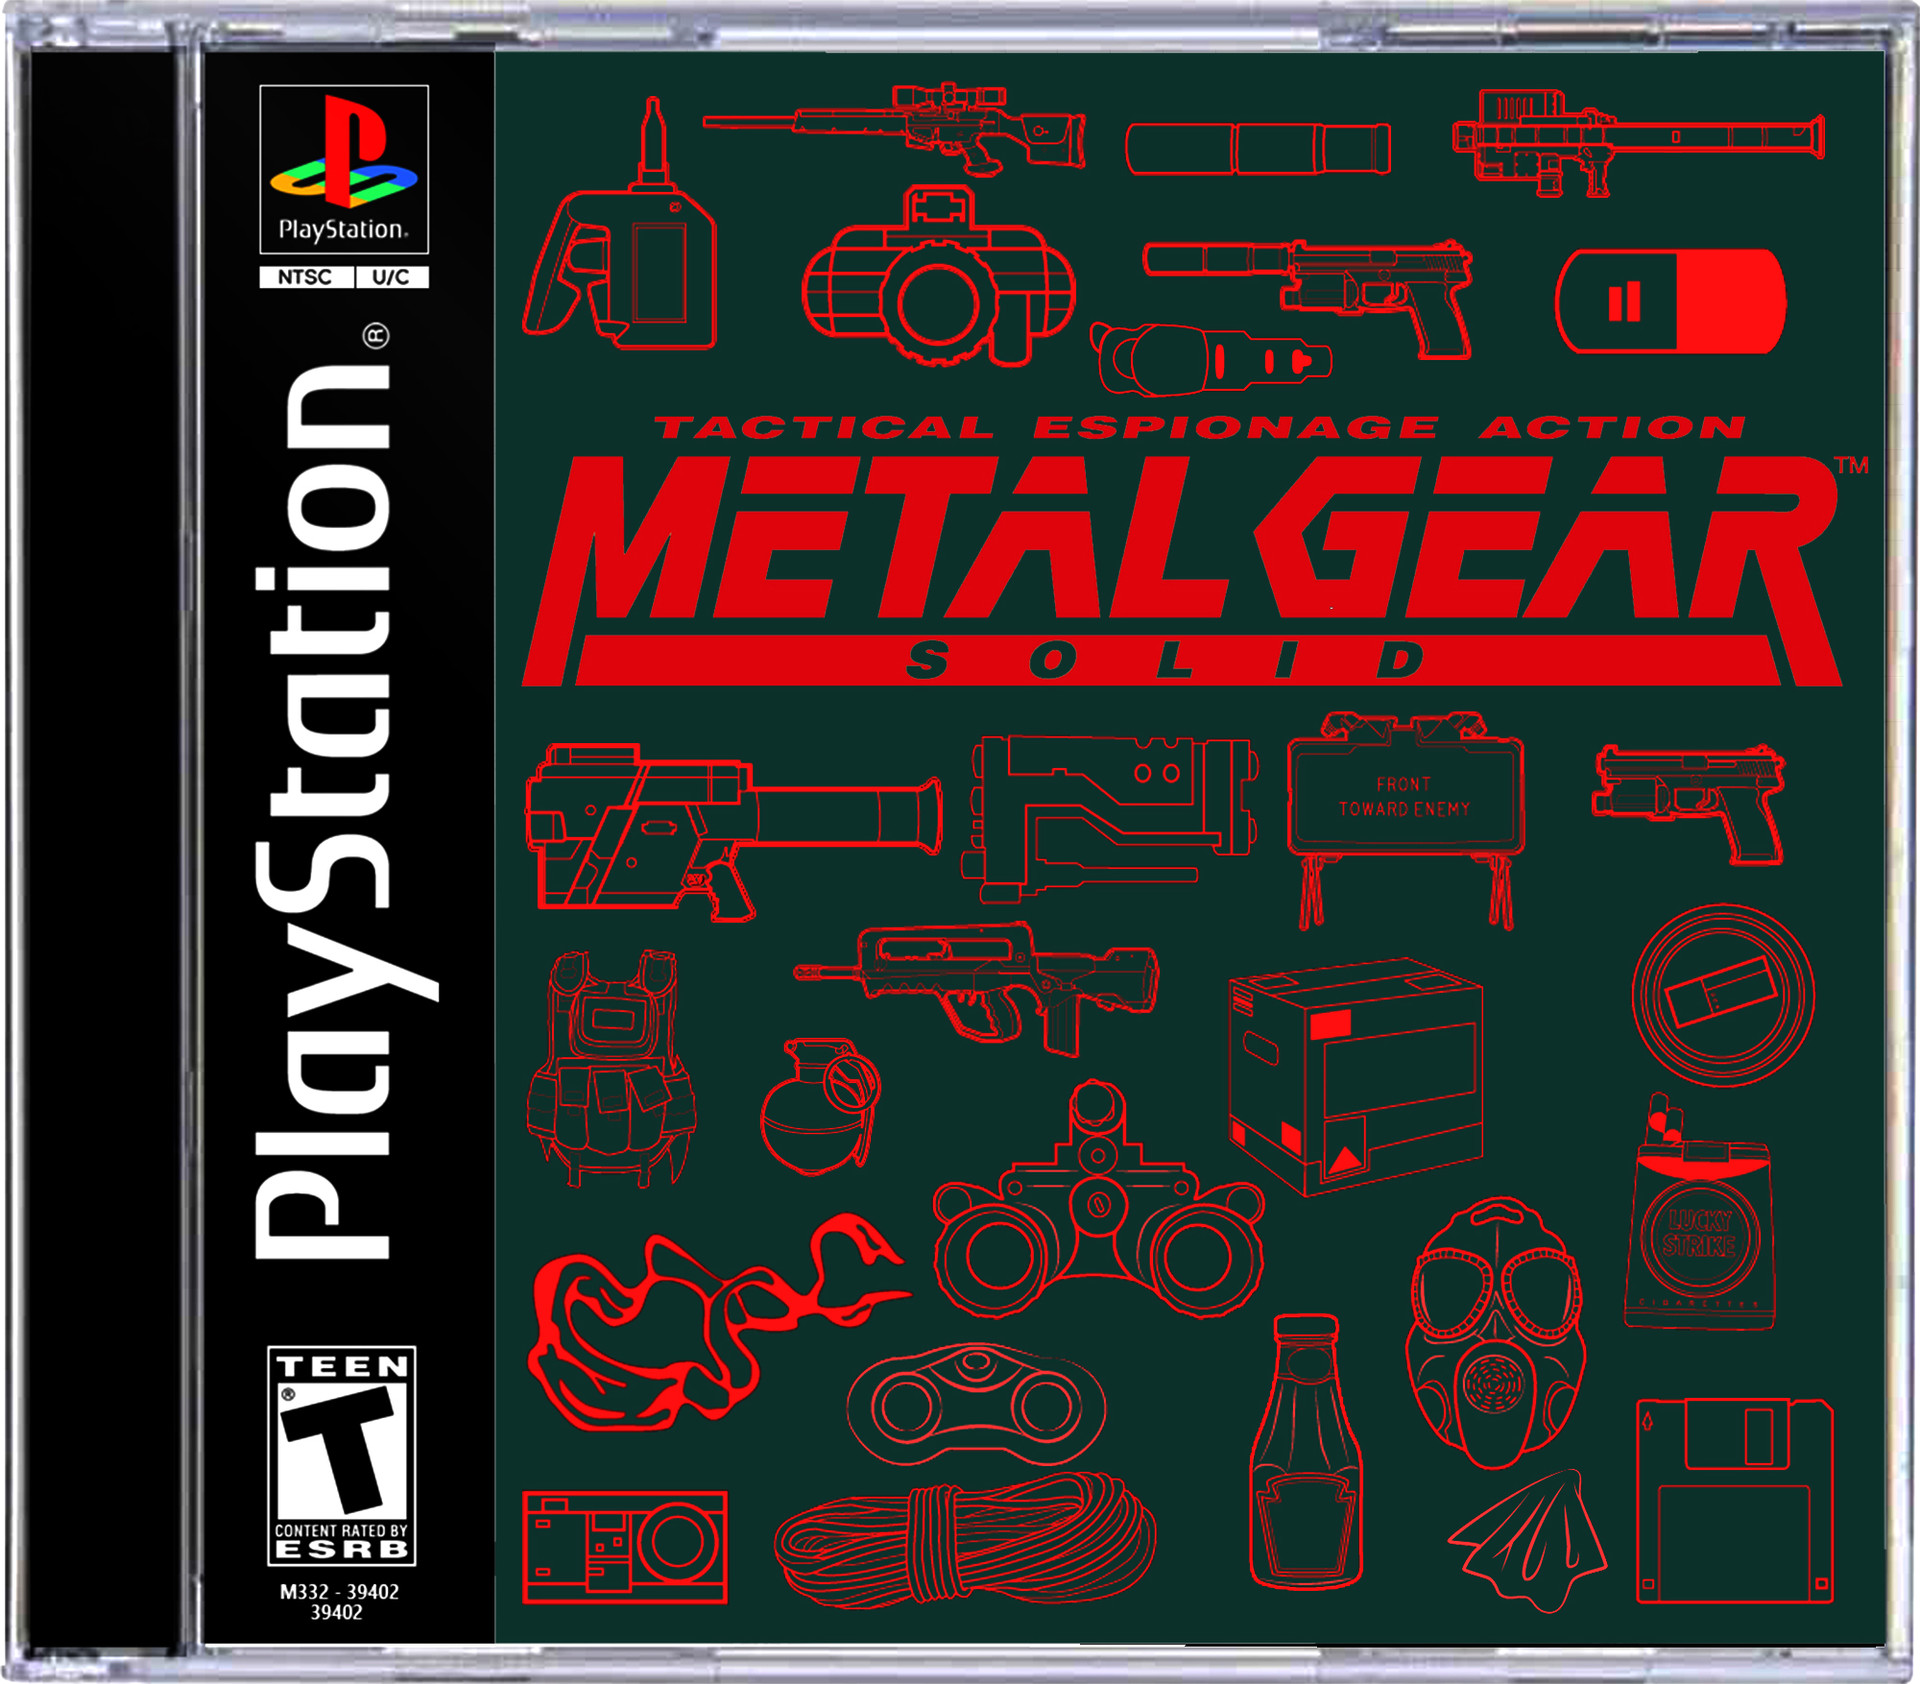 Playstation 1 Cover Redesigns.